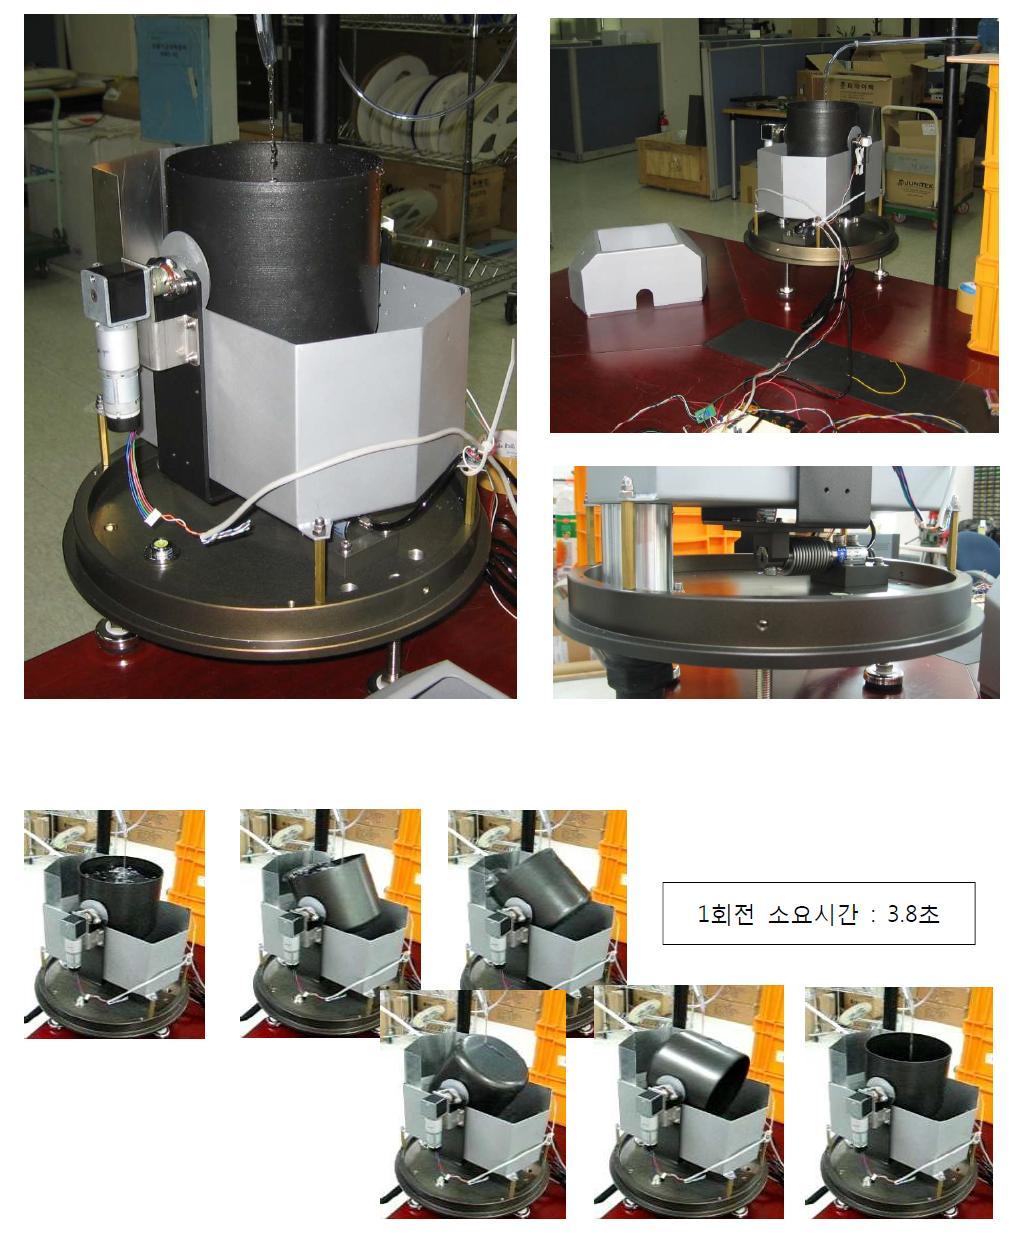 Pictures showing the inner structure of Auto-Empting Type Weighing Precipitation Gauge developed in this R&D(upper) and the sequence of container rotation for auto empting process.